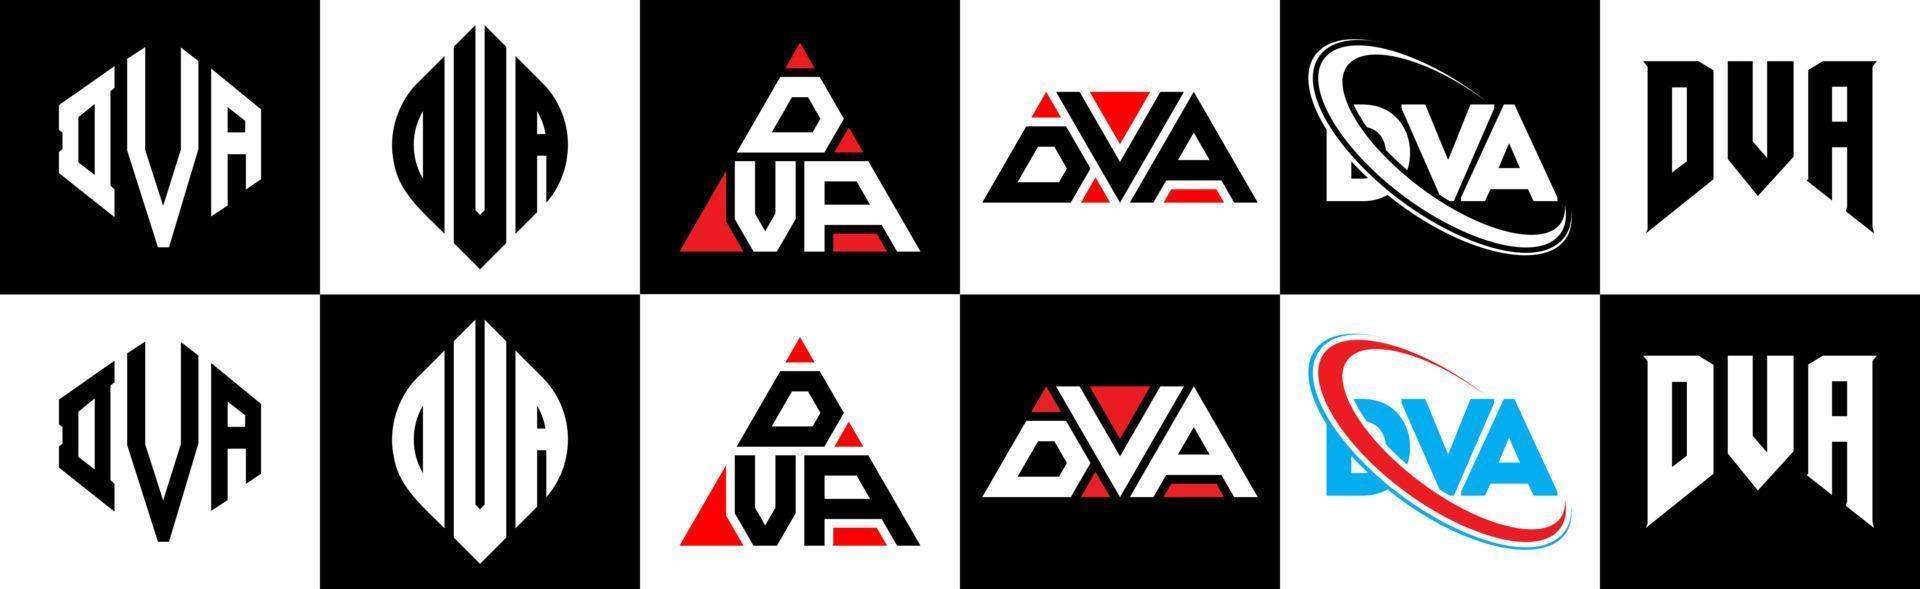 DVA letter logo design in six style. DVA polygon, circle, triangle, hexagon, flat and simple style with black and white color variation letter logo set in one artboard. DVA minimalist and classic logo vector